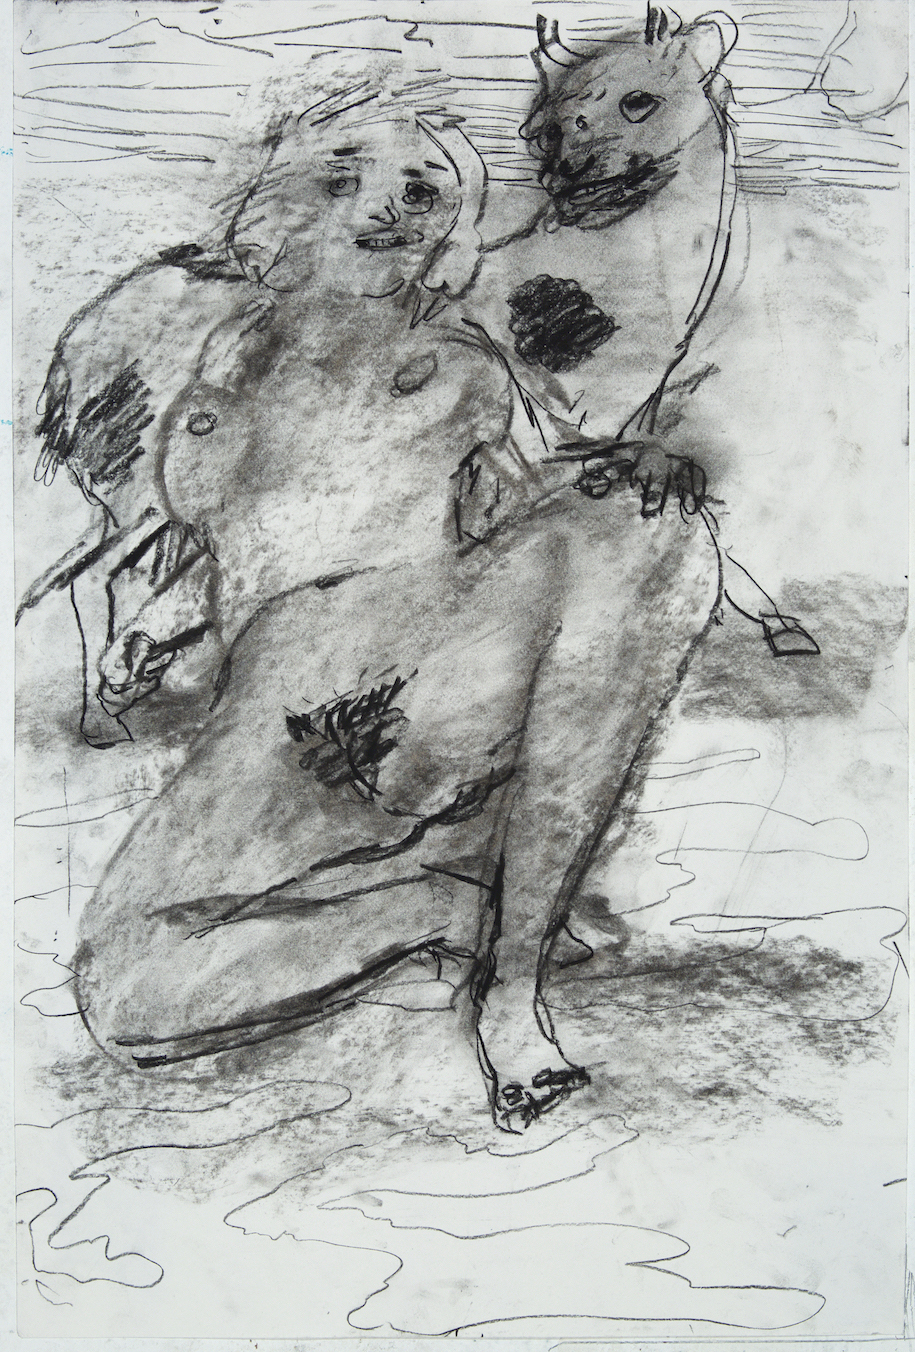 Yes charcoal 24 by 18 inches 2015.jpg